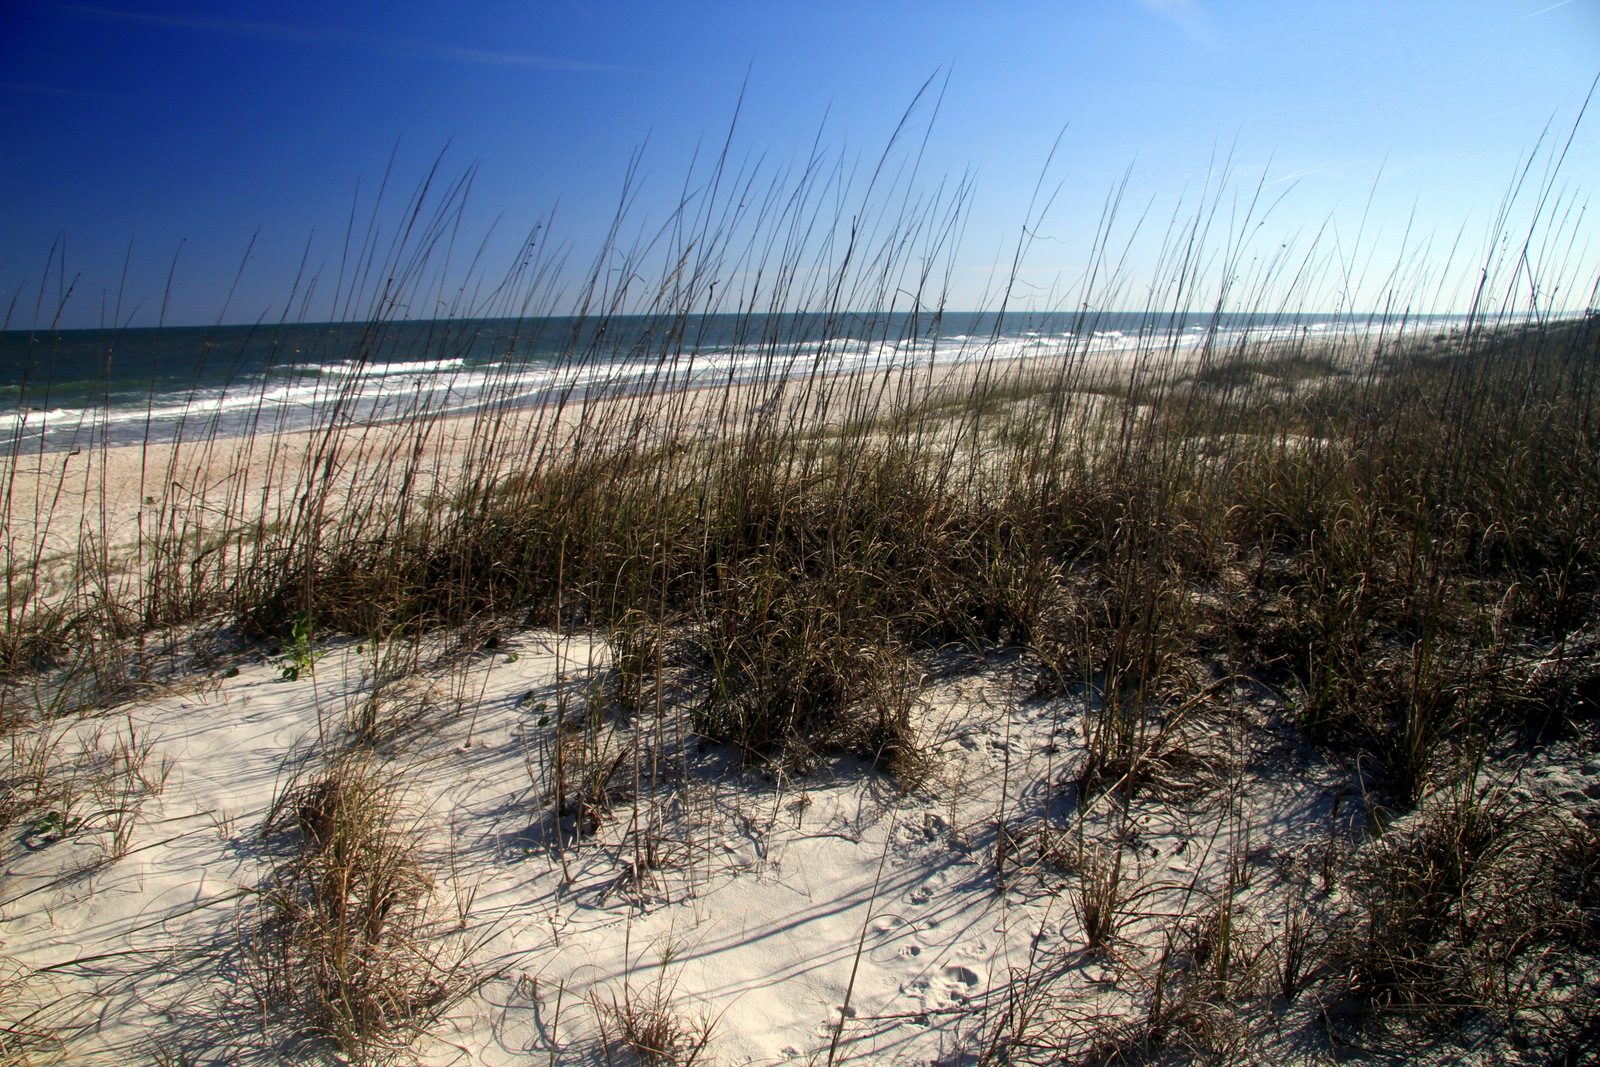 A Few More Things That Make Amelia Island An Attractive Place To Live & Visit